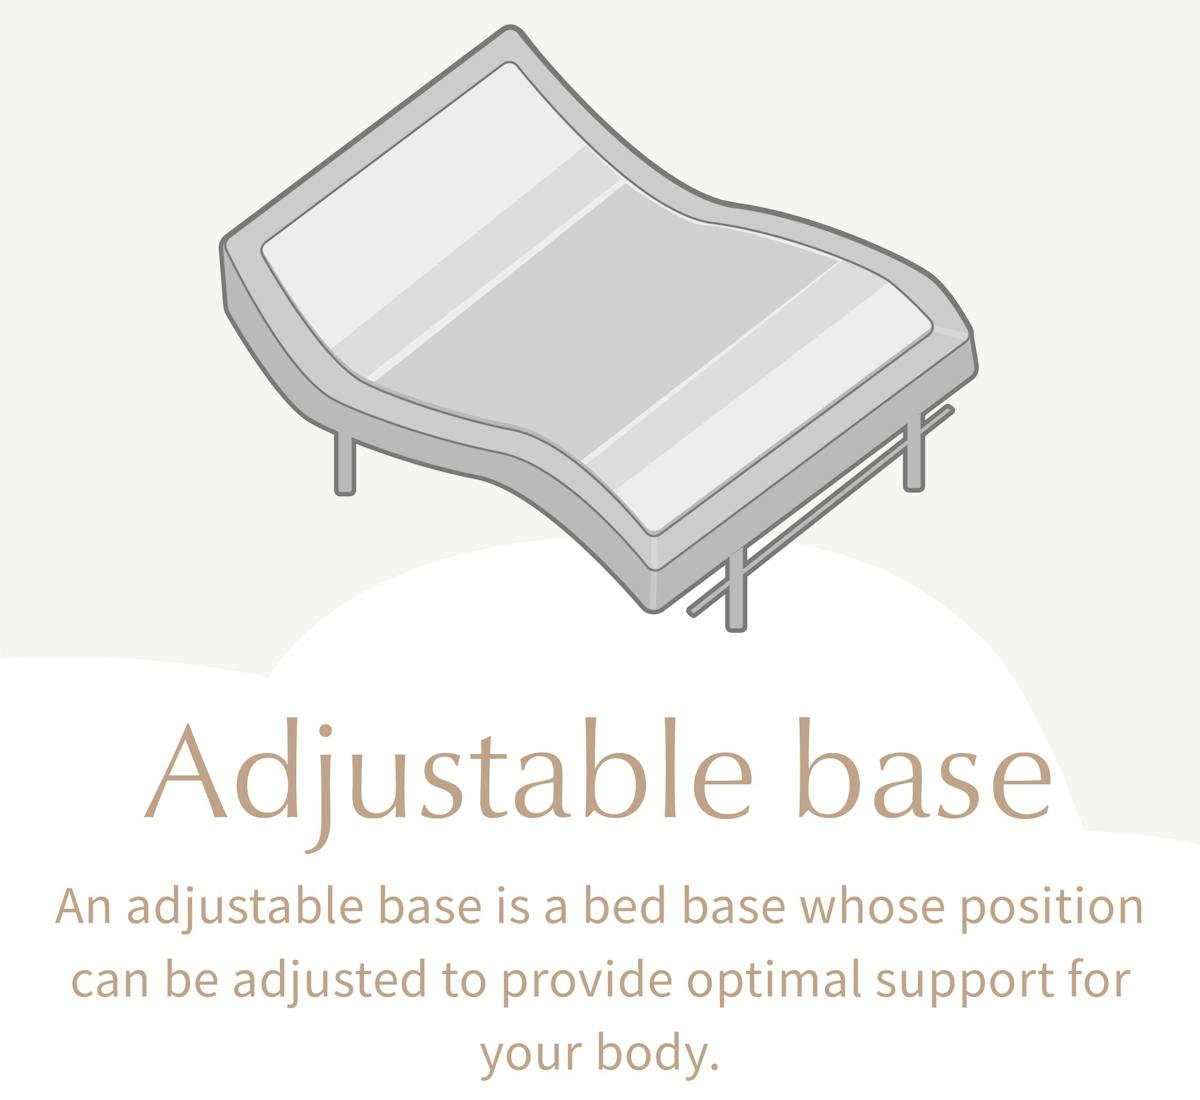 Foundation vs. Adjustable Base – What's the Difference?